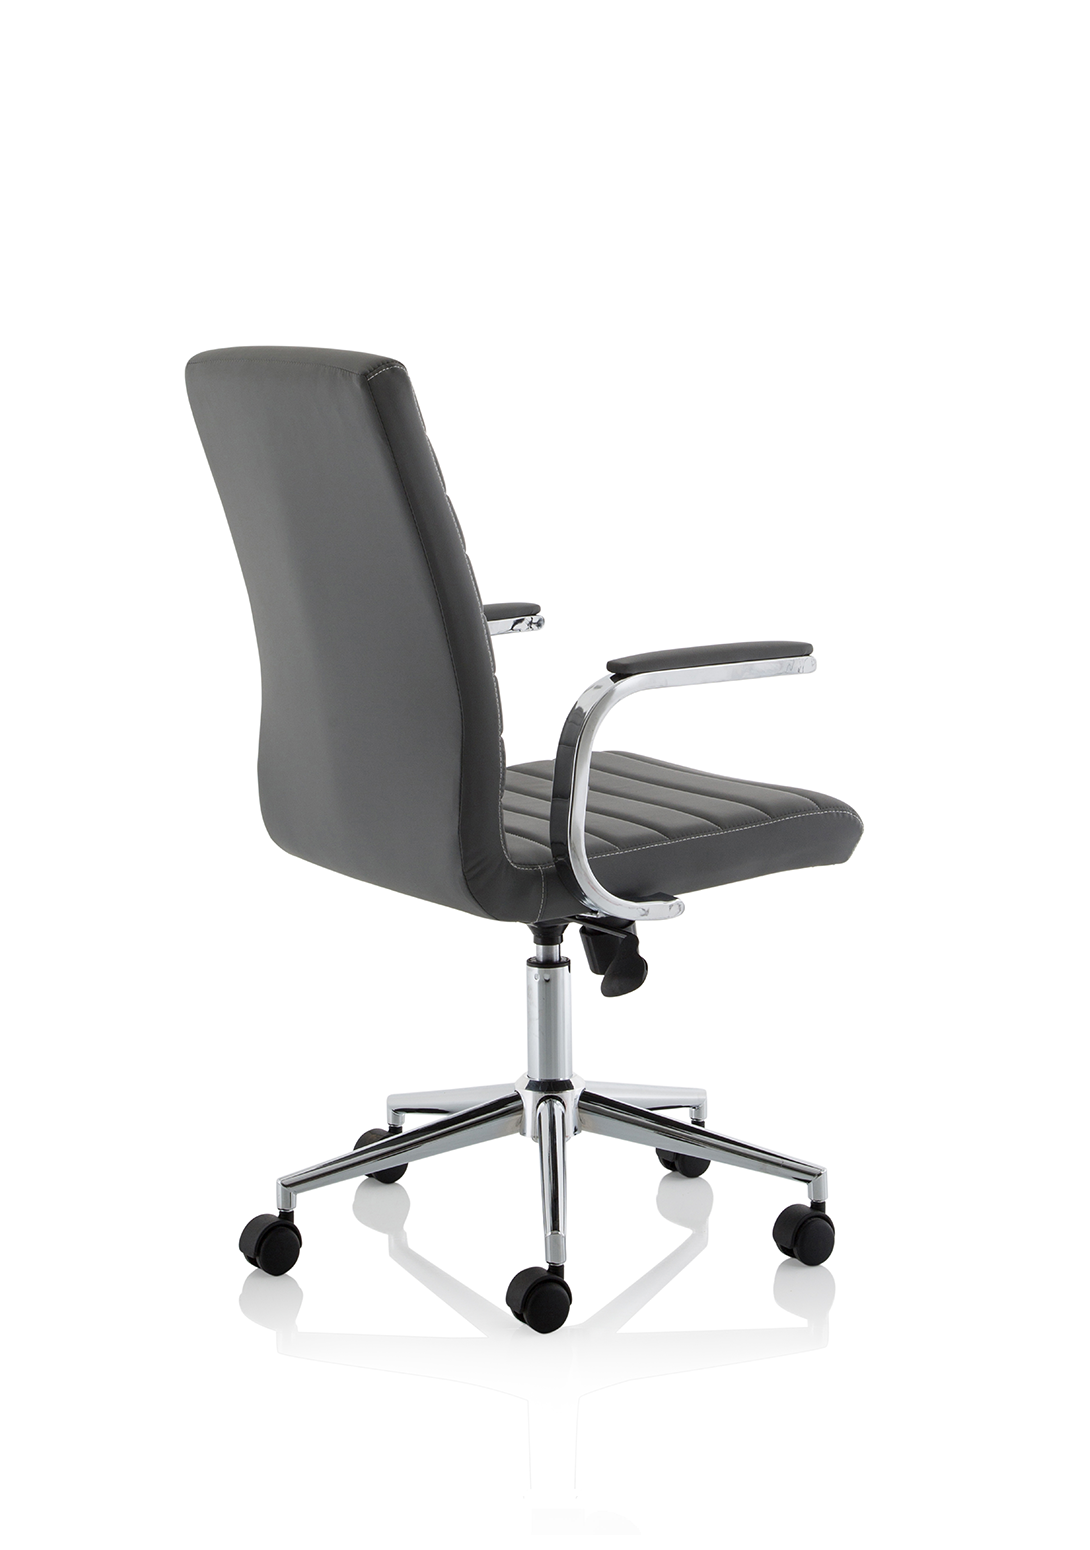 Ezra Exec Home Office Chair | Executive Chair | Home Office Furniture | Padded Soft Chair | Leather Executive Chair | Leather Home Office Chair | Swivel Office Chair